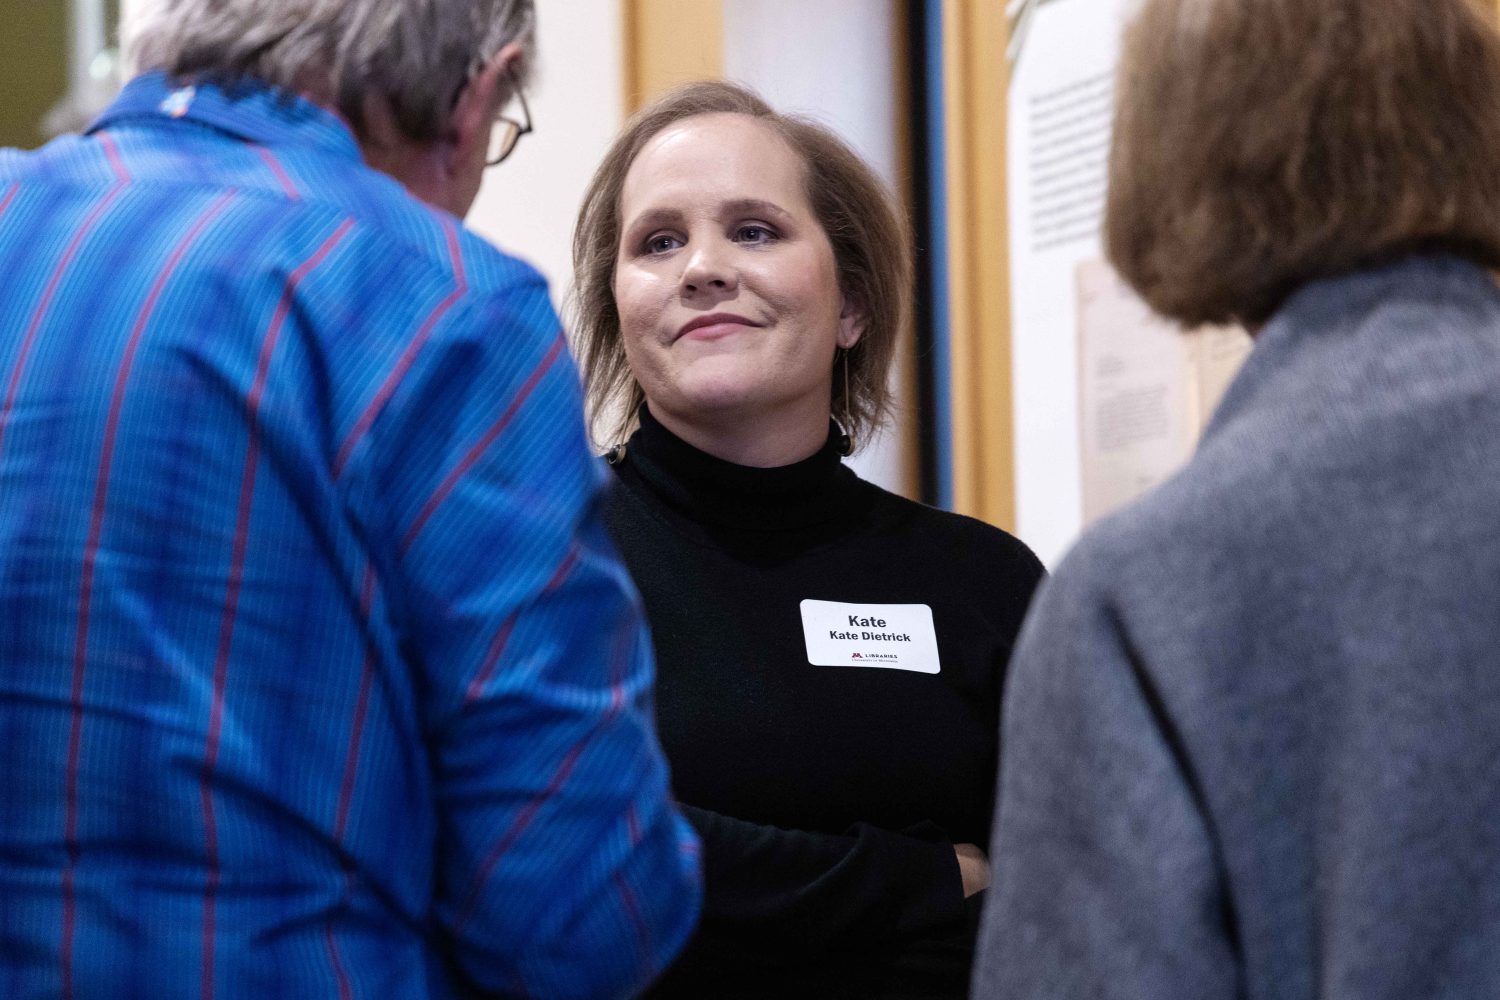 Kate Dietrick, the archivist for the Upper Midwest Jewish Archives, talks with guests at the Symbolic Significance exhibit opening event on Monday, Sept. 11, 2023. (Photo/Adria Carpenter)